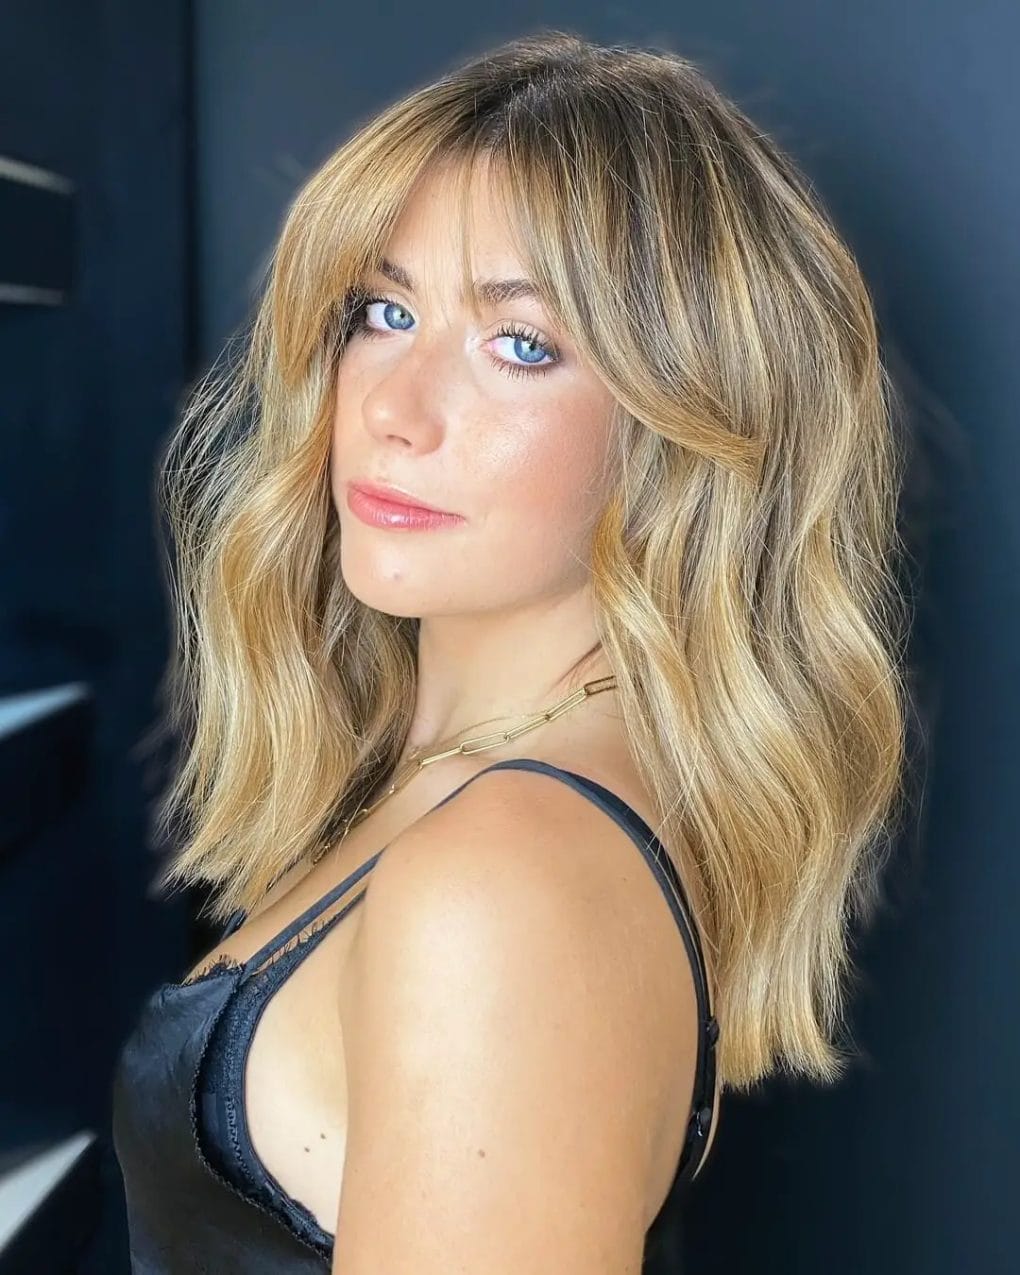 Balayage blending of blonde and brunette hues with curtain Bardot bangs, showcasing modern grace with classic charm.